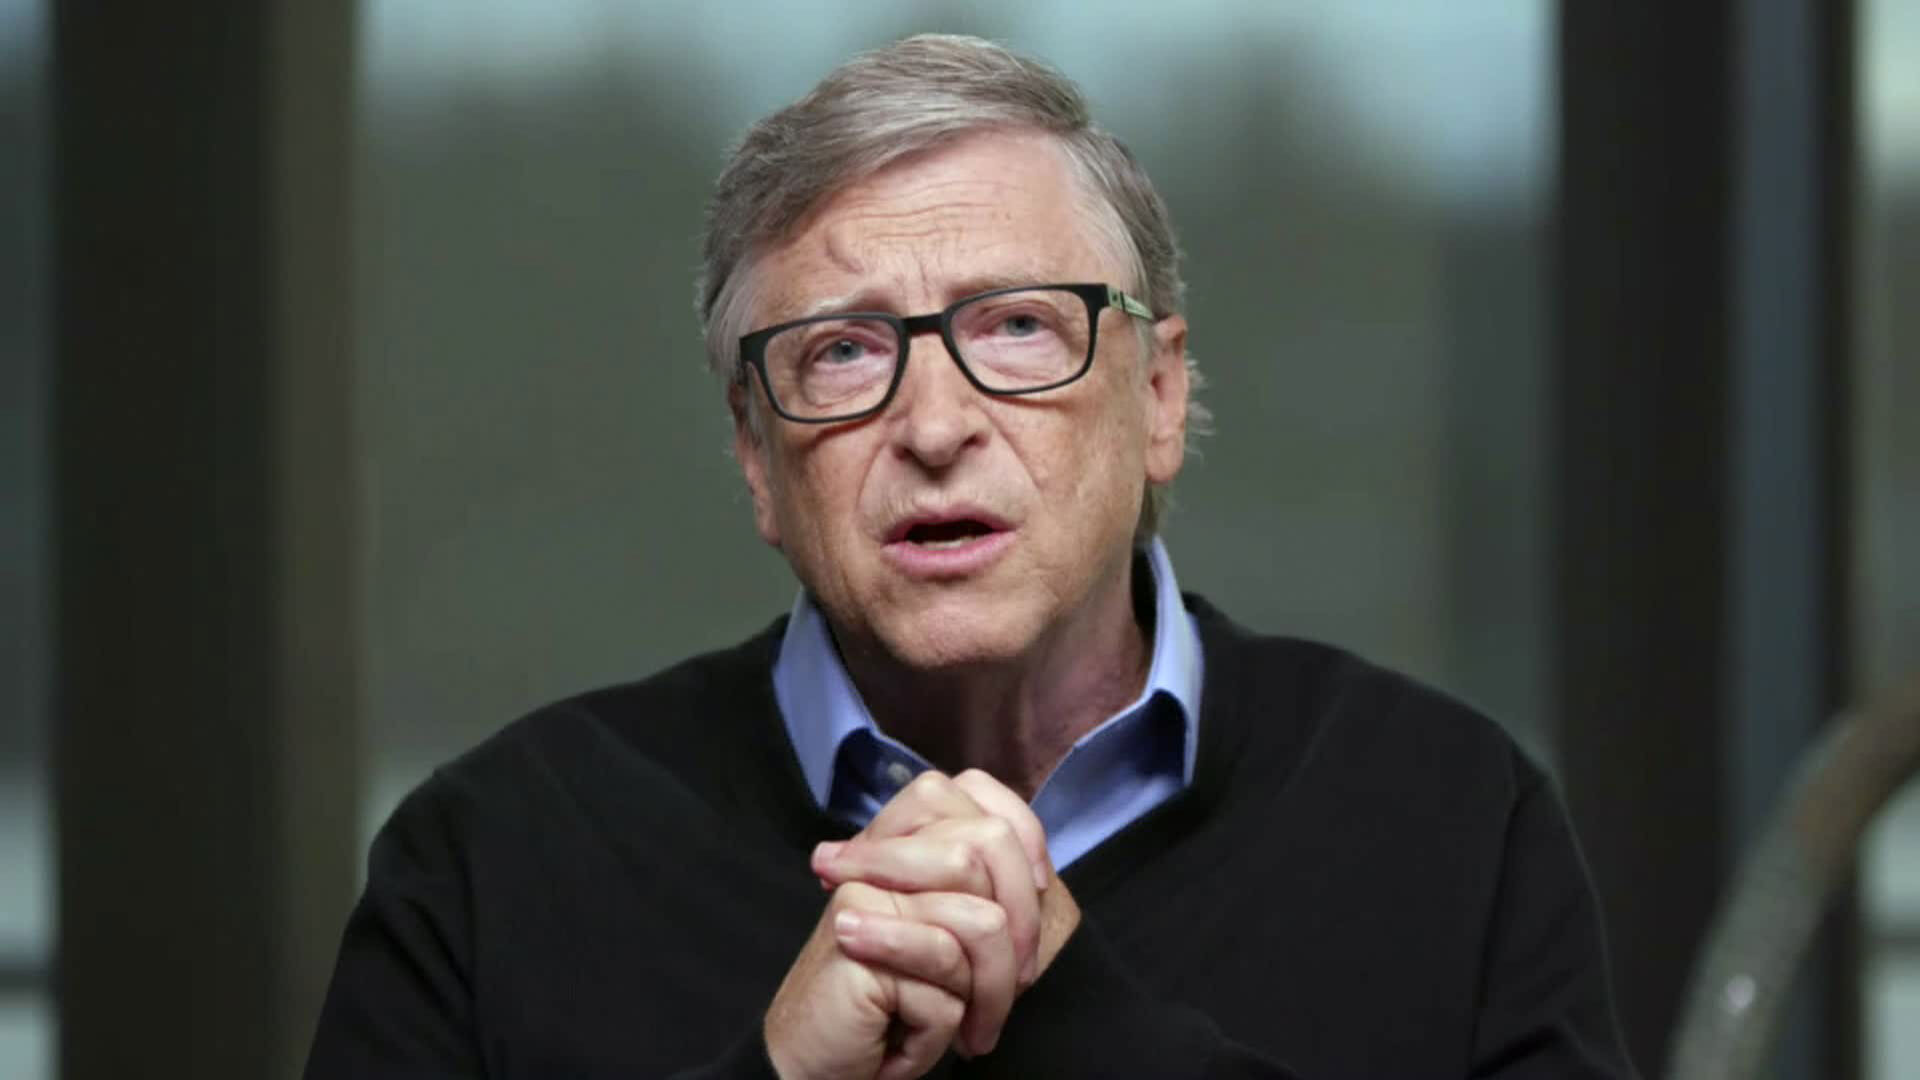 What You Should Know About Bill Gates, Co-Founder of Microsoft